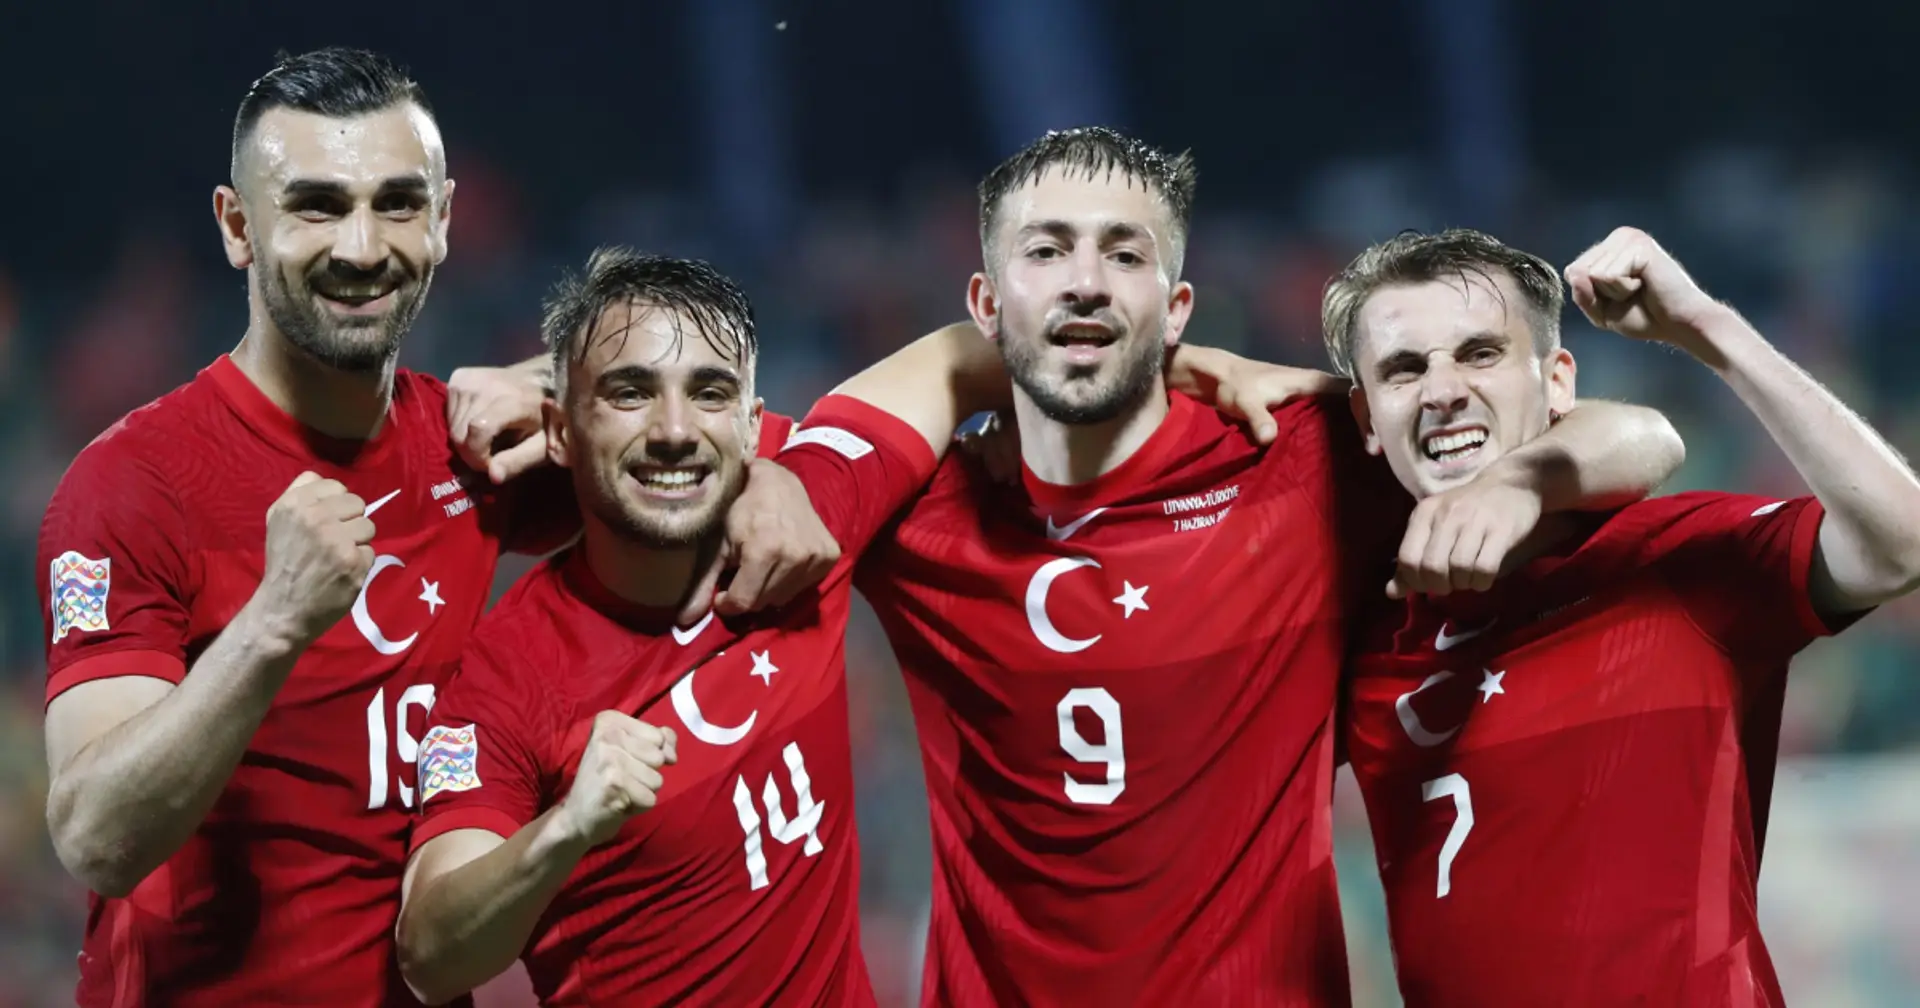 Leicester City complete €10 million deal for Turkish international